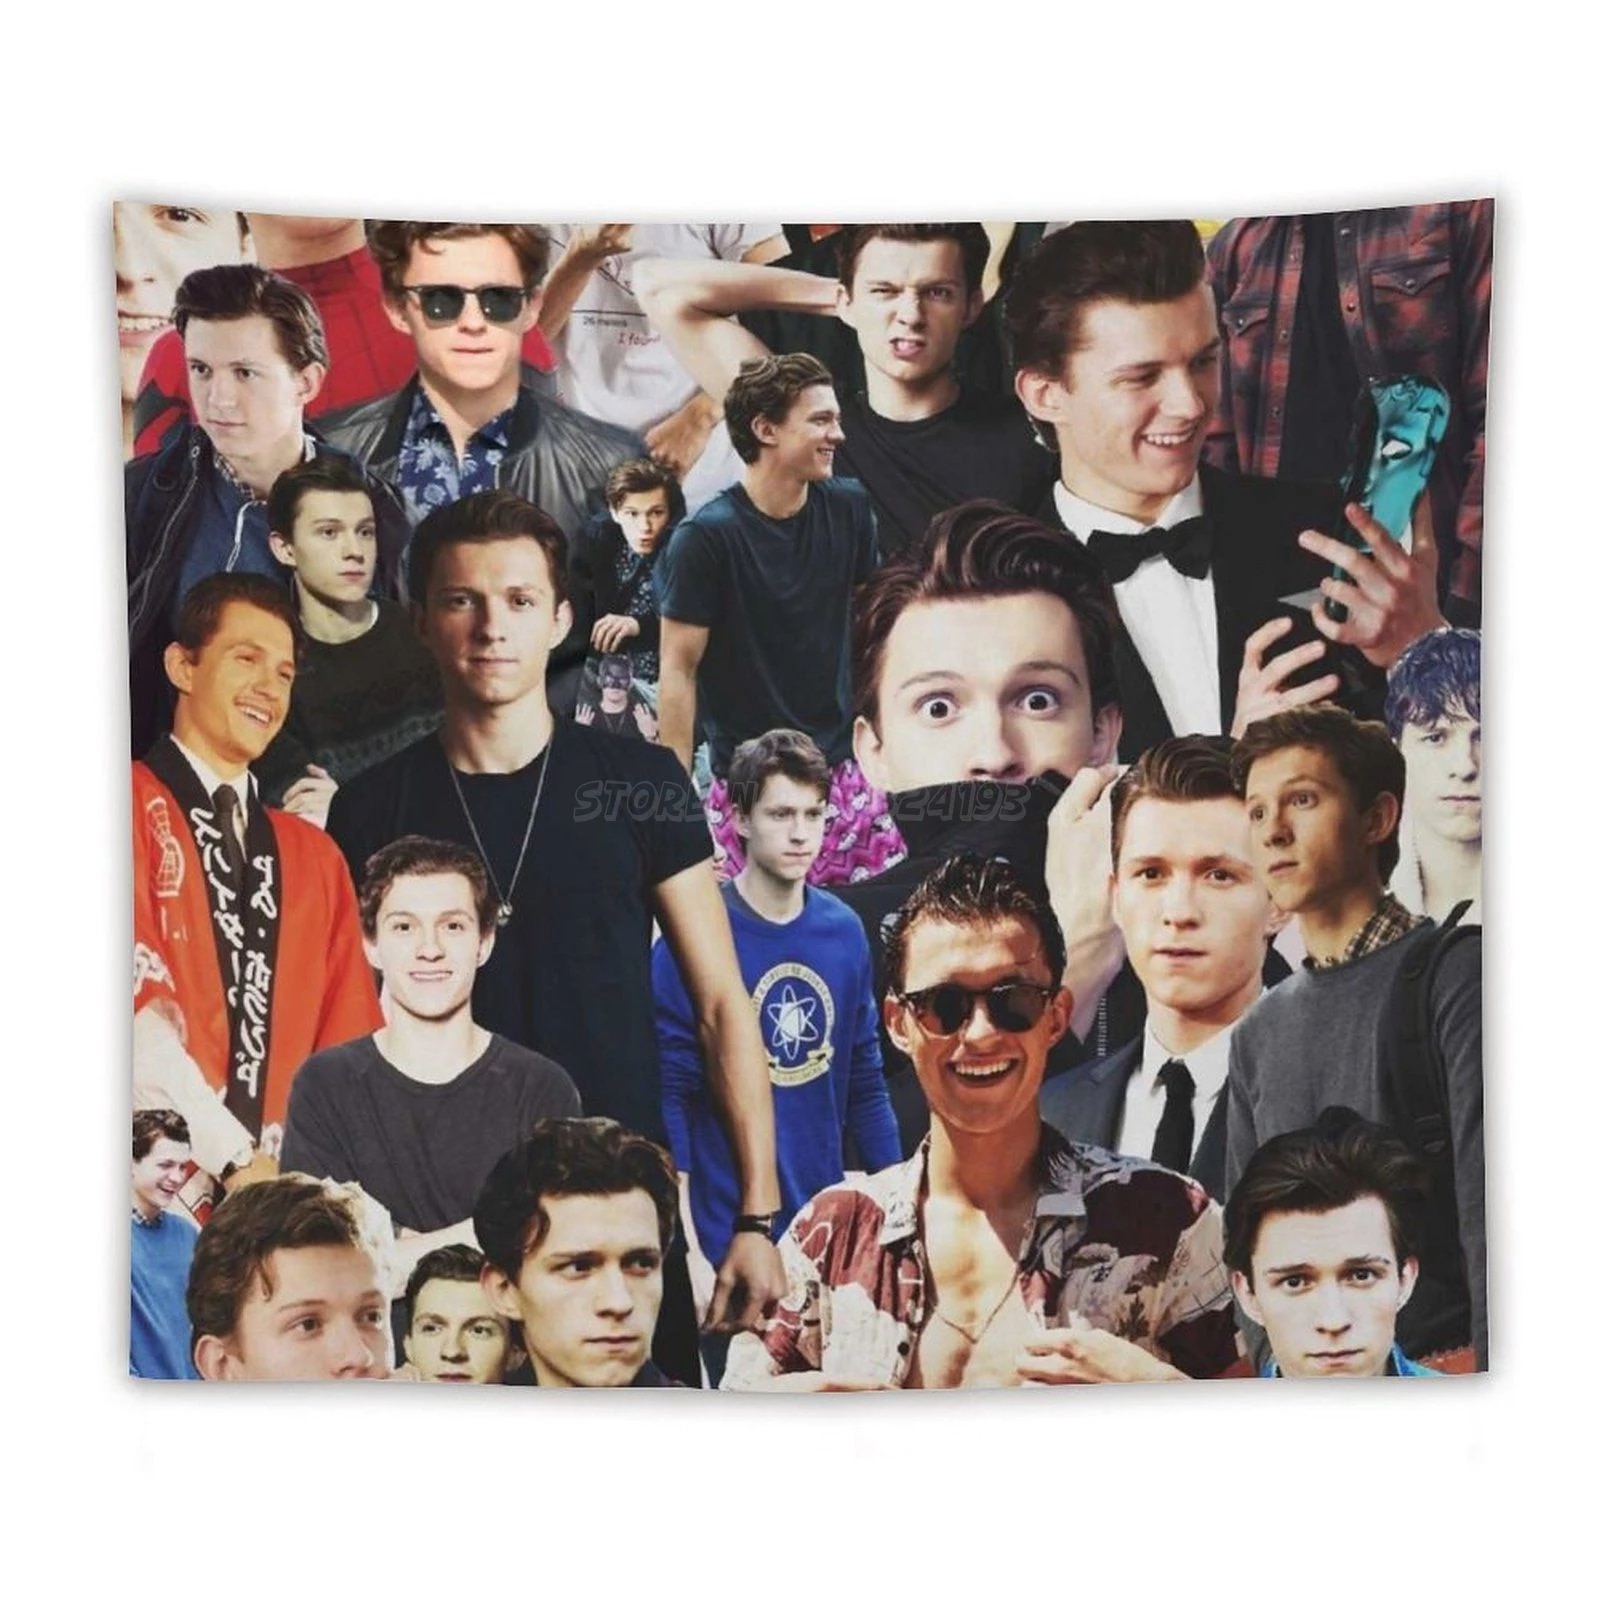 Tom Holland Collage Tapestry Wall Hanging Home Tapestry Mandala Wall Decoration Hippie Decorative Tom Holland Collage. Decorative Tapestries